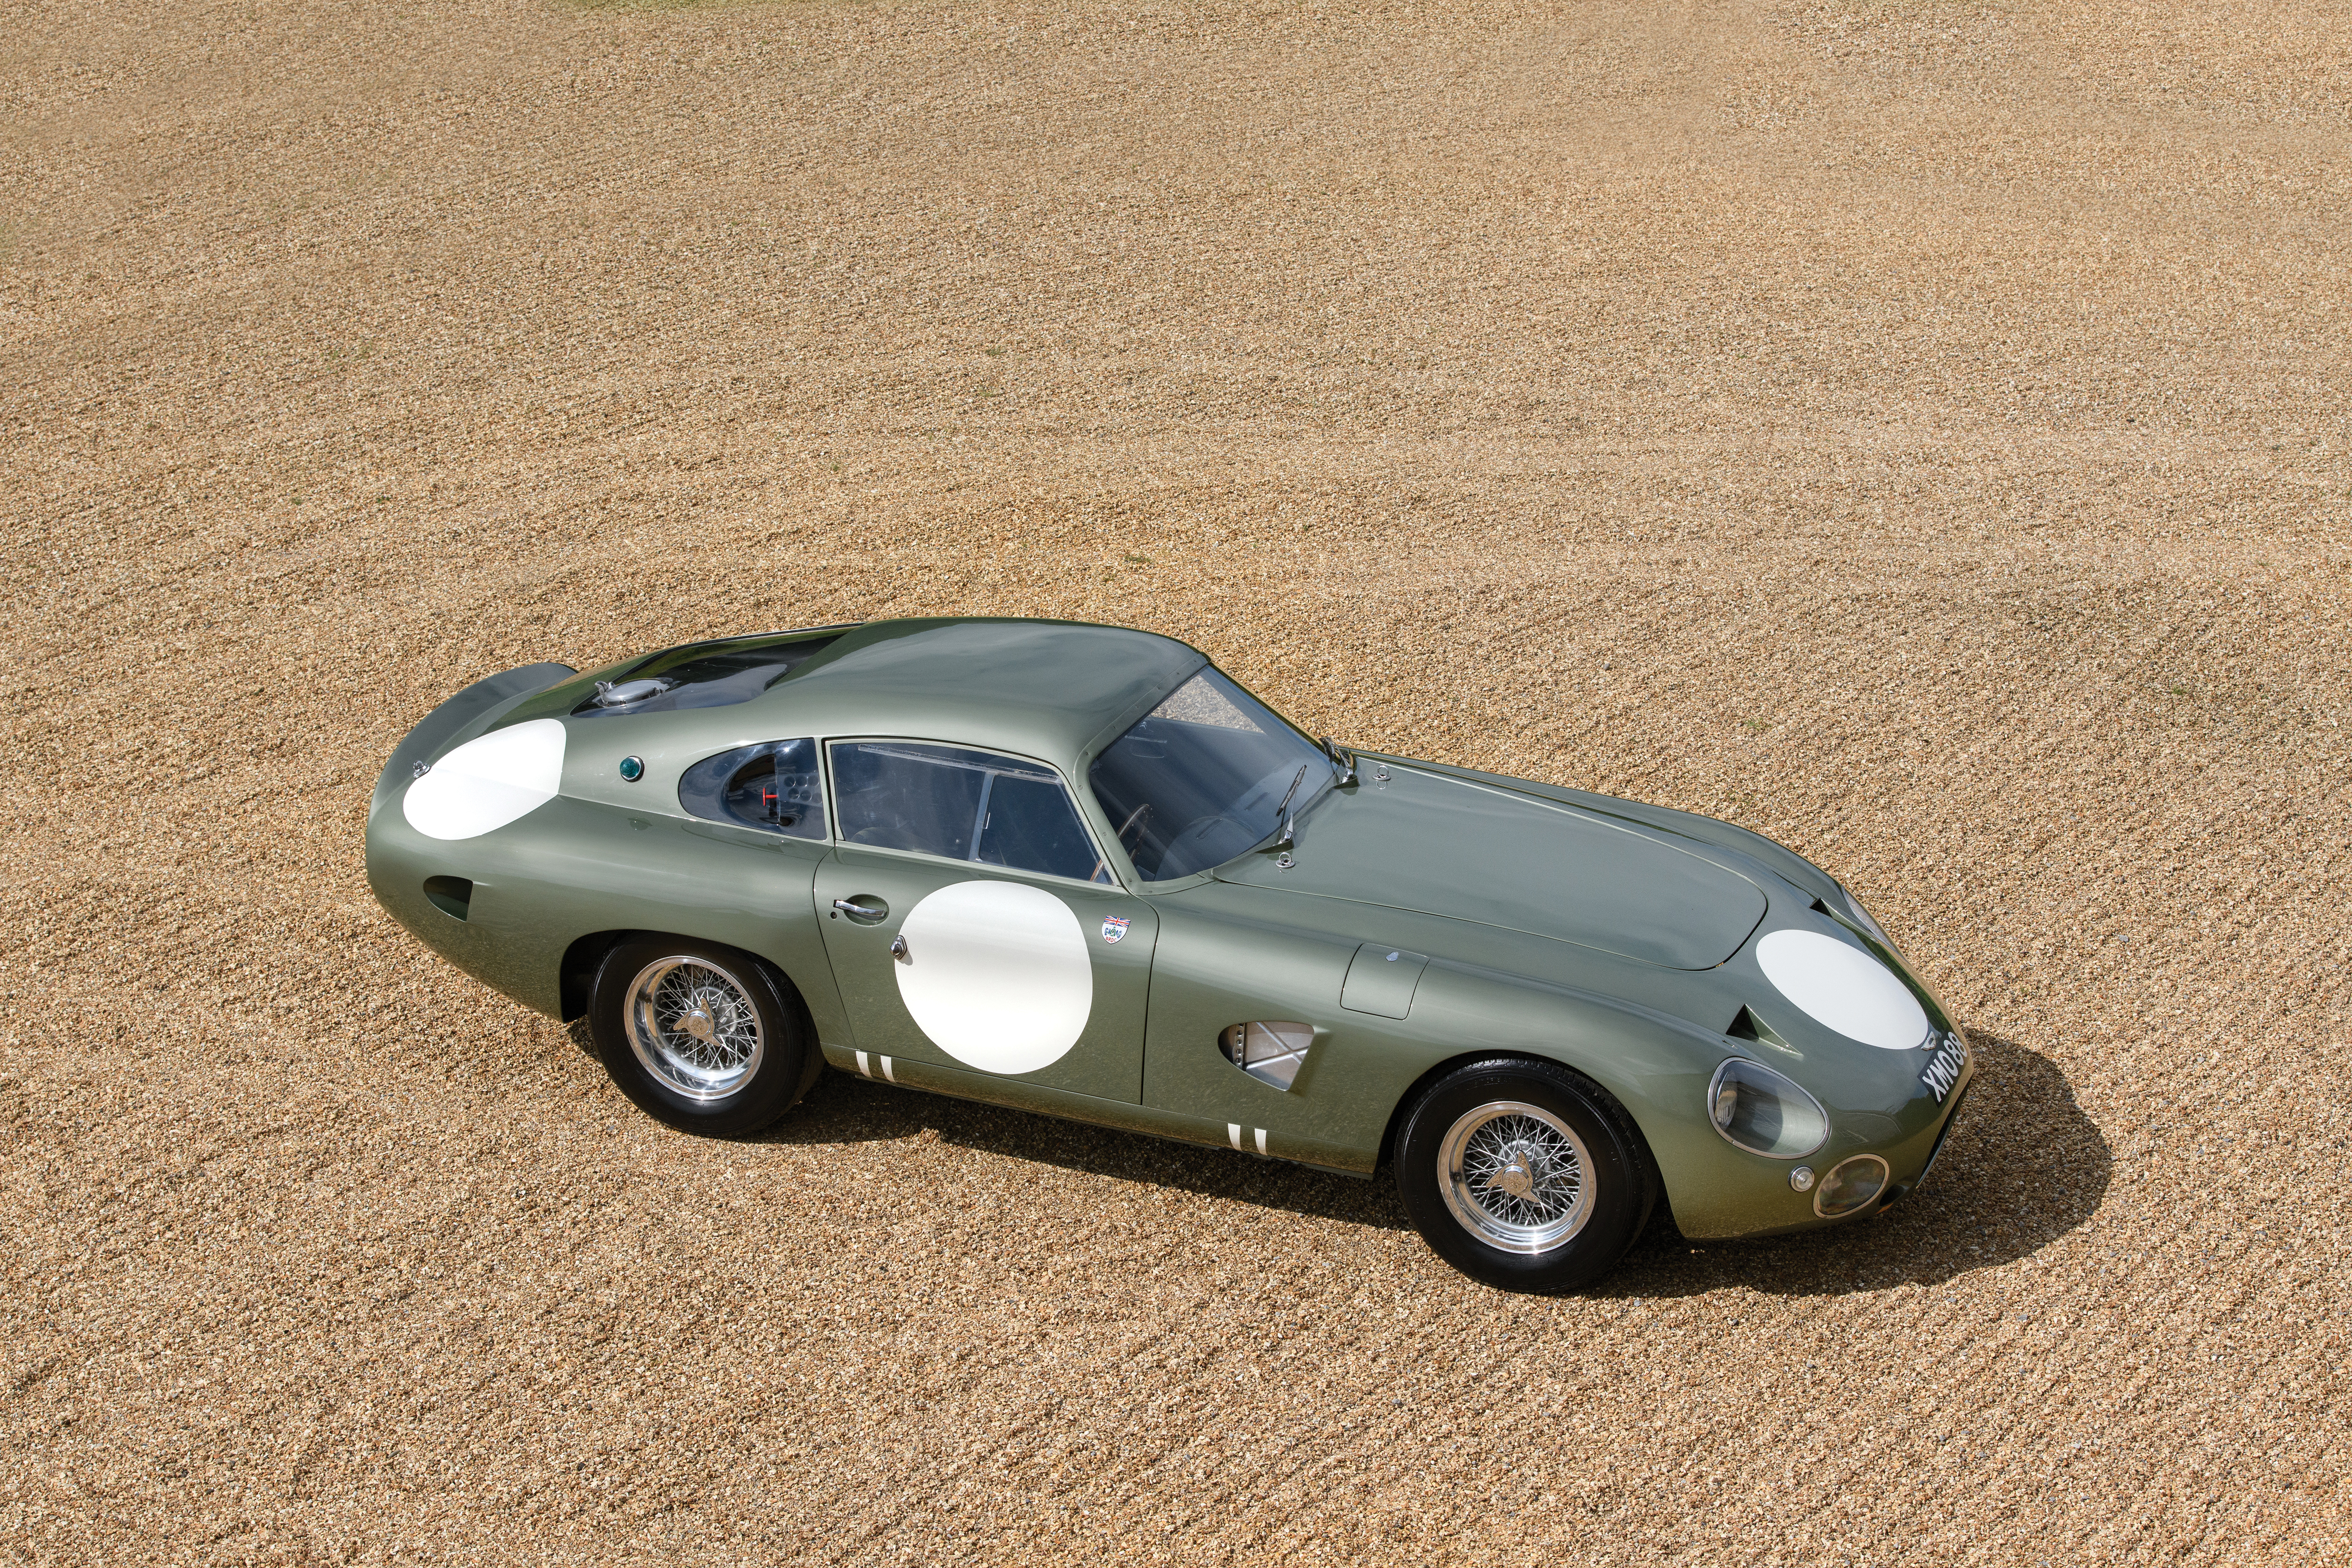 Another view of the stunning 1963 Aston Martin DP215 (Credit – Tim Scott Fluid Images © 2018 Courtesy of RM Sotheby’s).